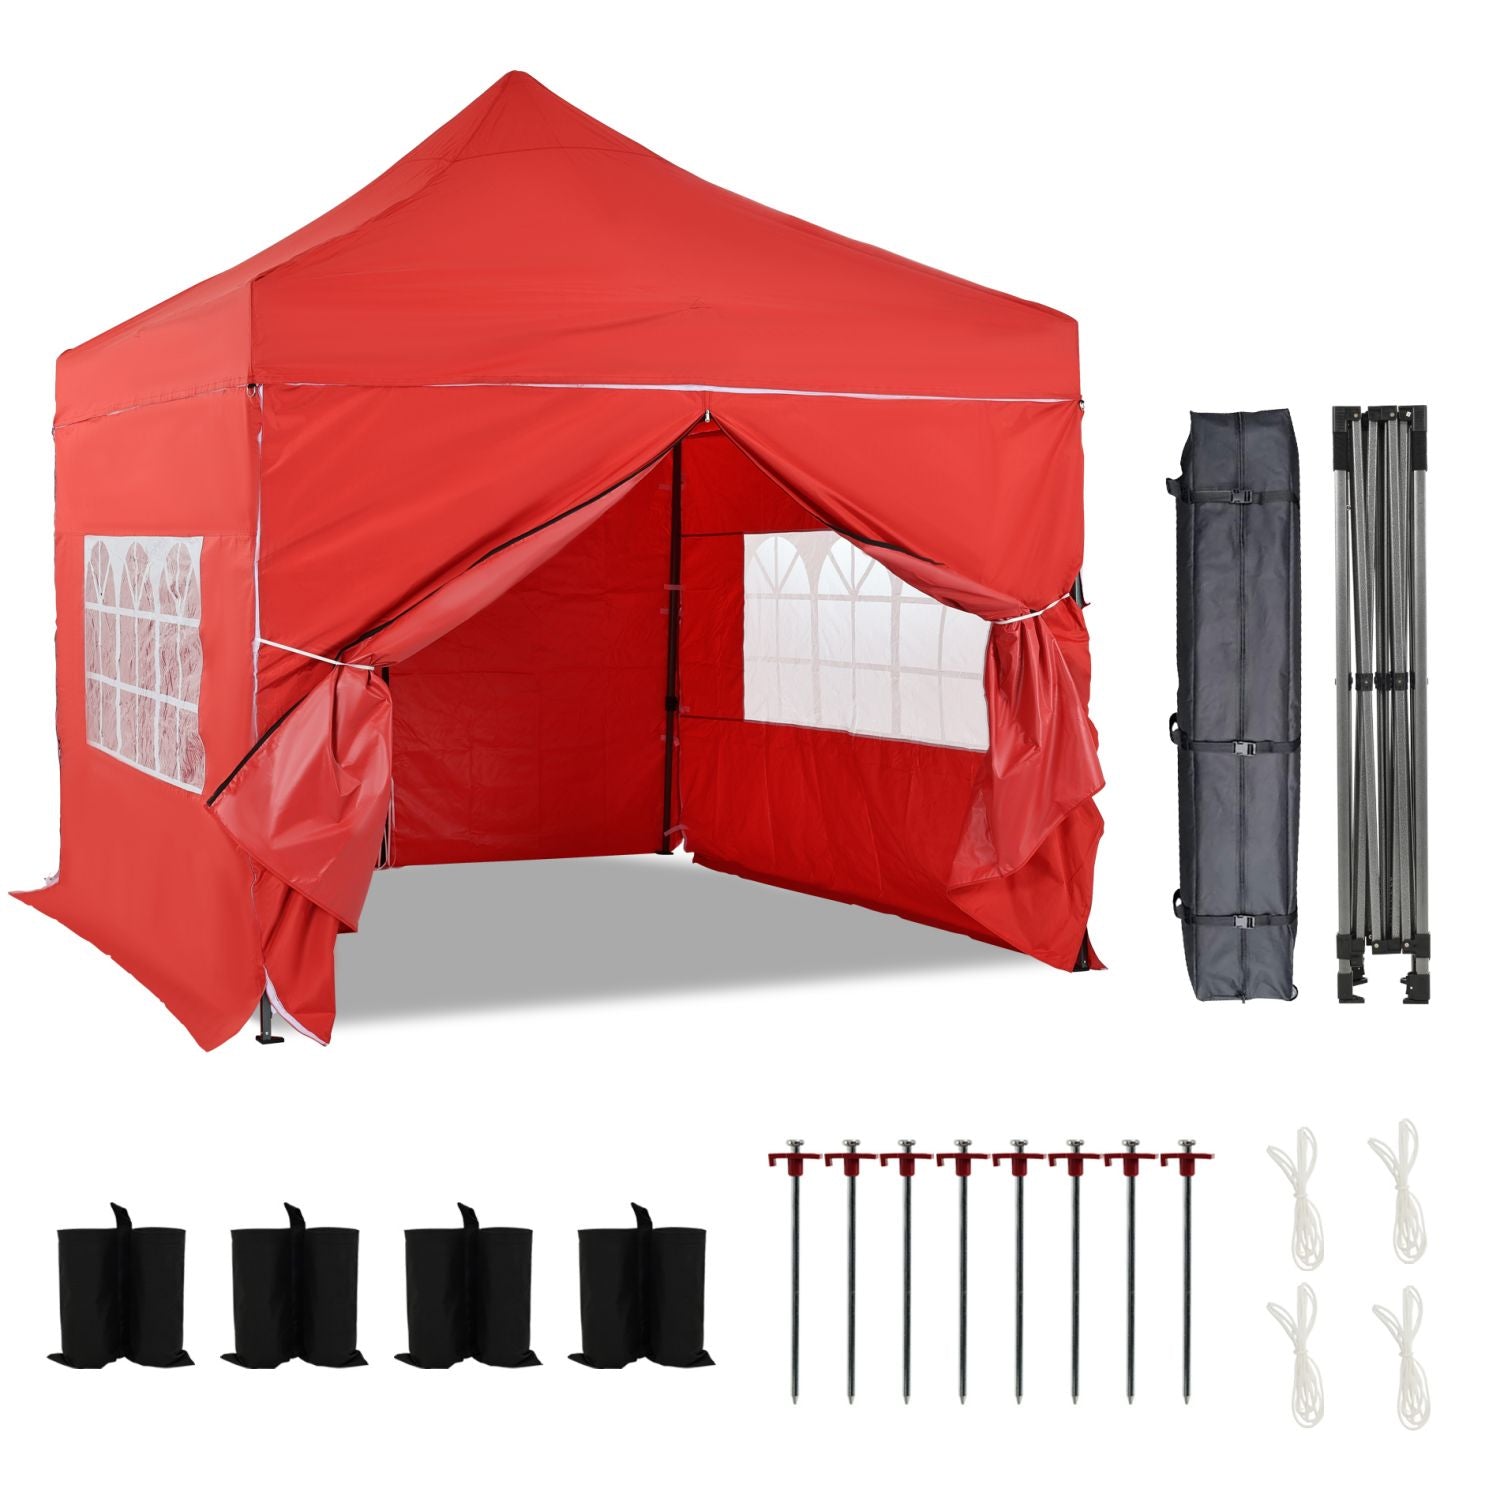 10 x 10 FT. Pop Up Canopy Tent with Windows Sidewalls, 3 Adjustable Heights, with Wheeled Bag  Aoodor  Red  